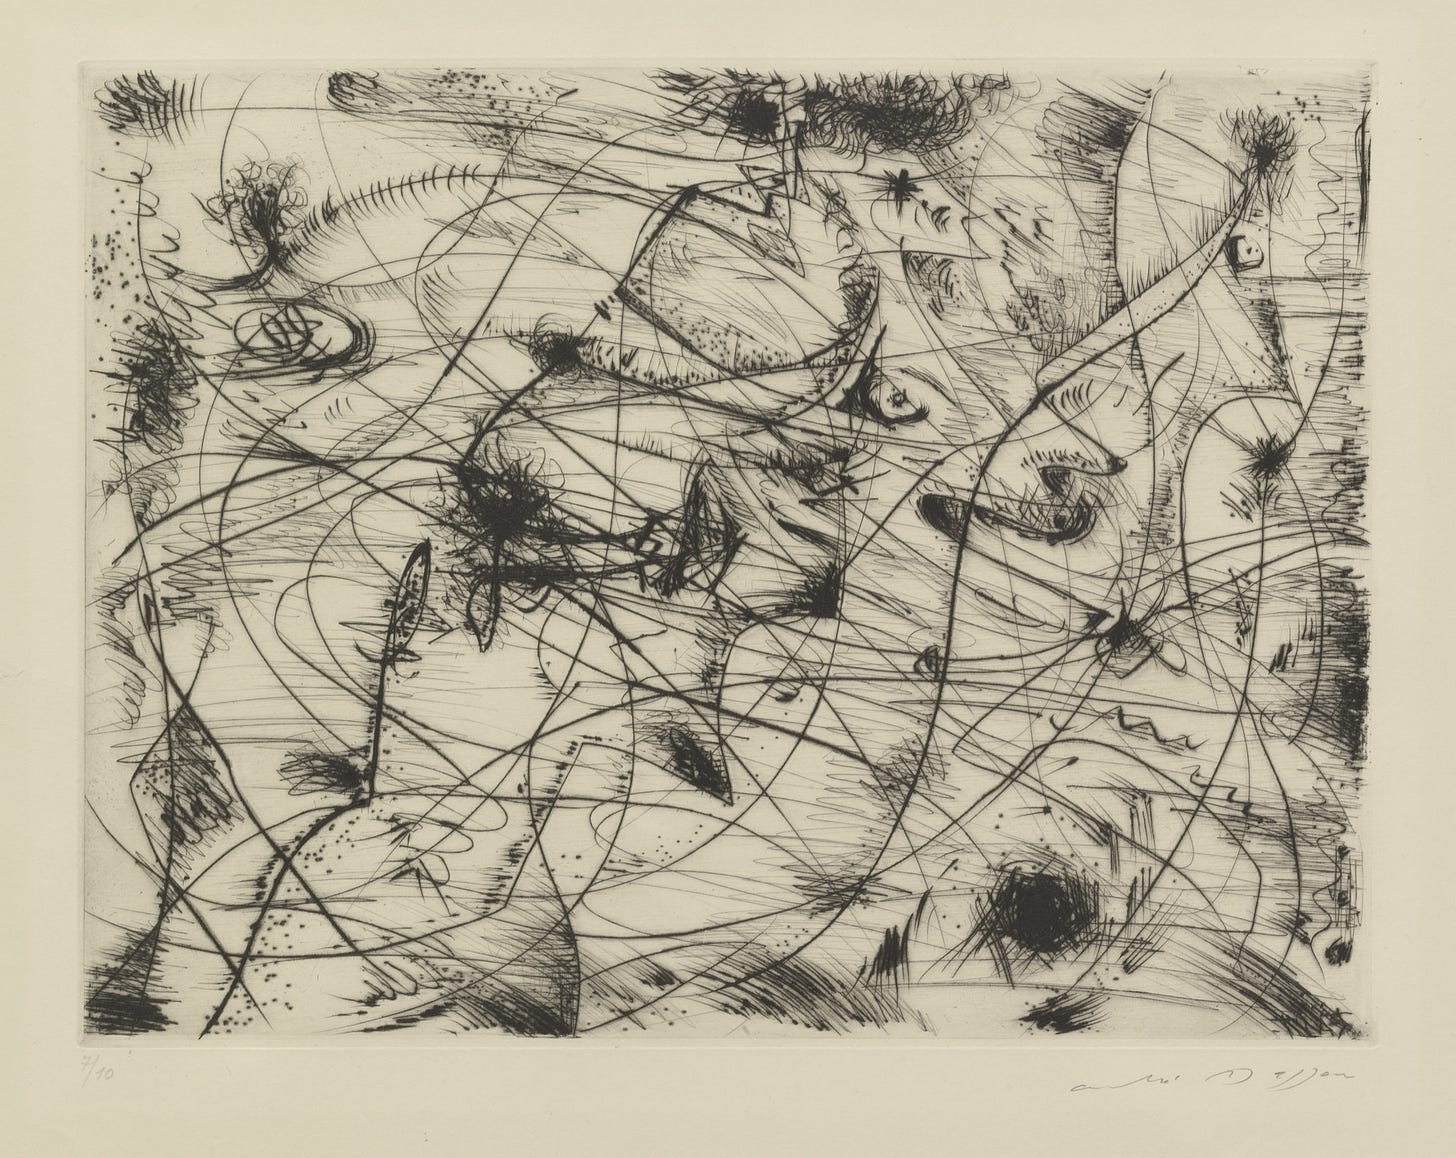 André Masson. Abduction. c. 1946 (printed 1958) | MoMA